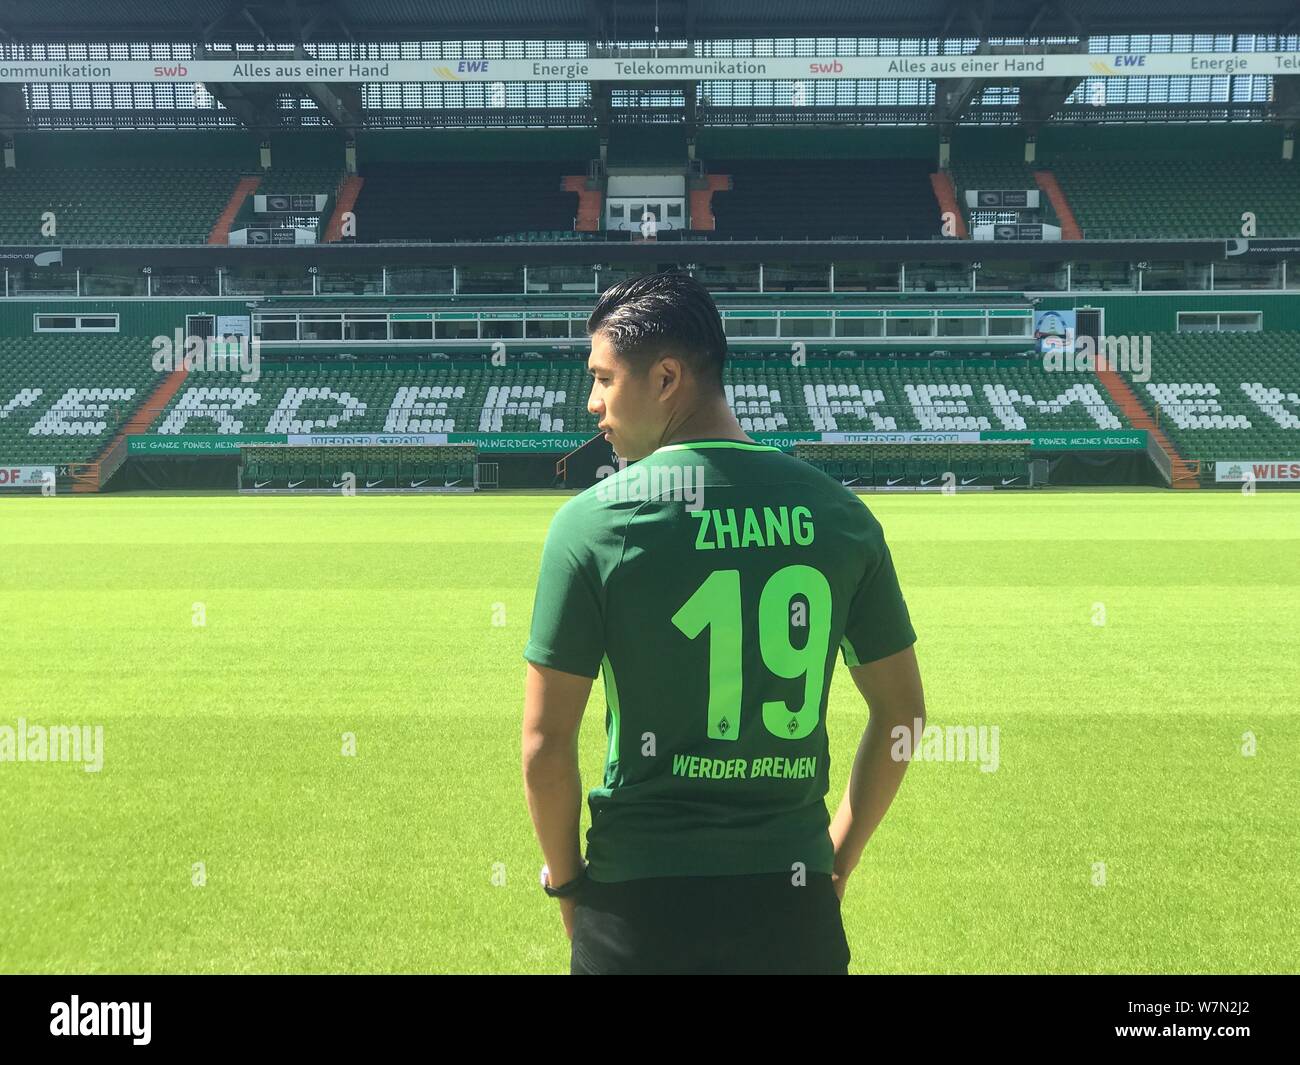 Chinese striker Zhang Yuning wears his new soccer jersey of Werder Bremen after West Bromwich Albion signed him from Vitesse Arnhem and loaned him to Stock Photo